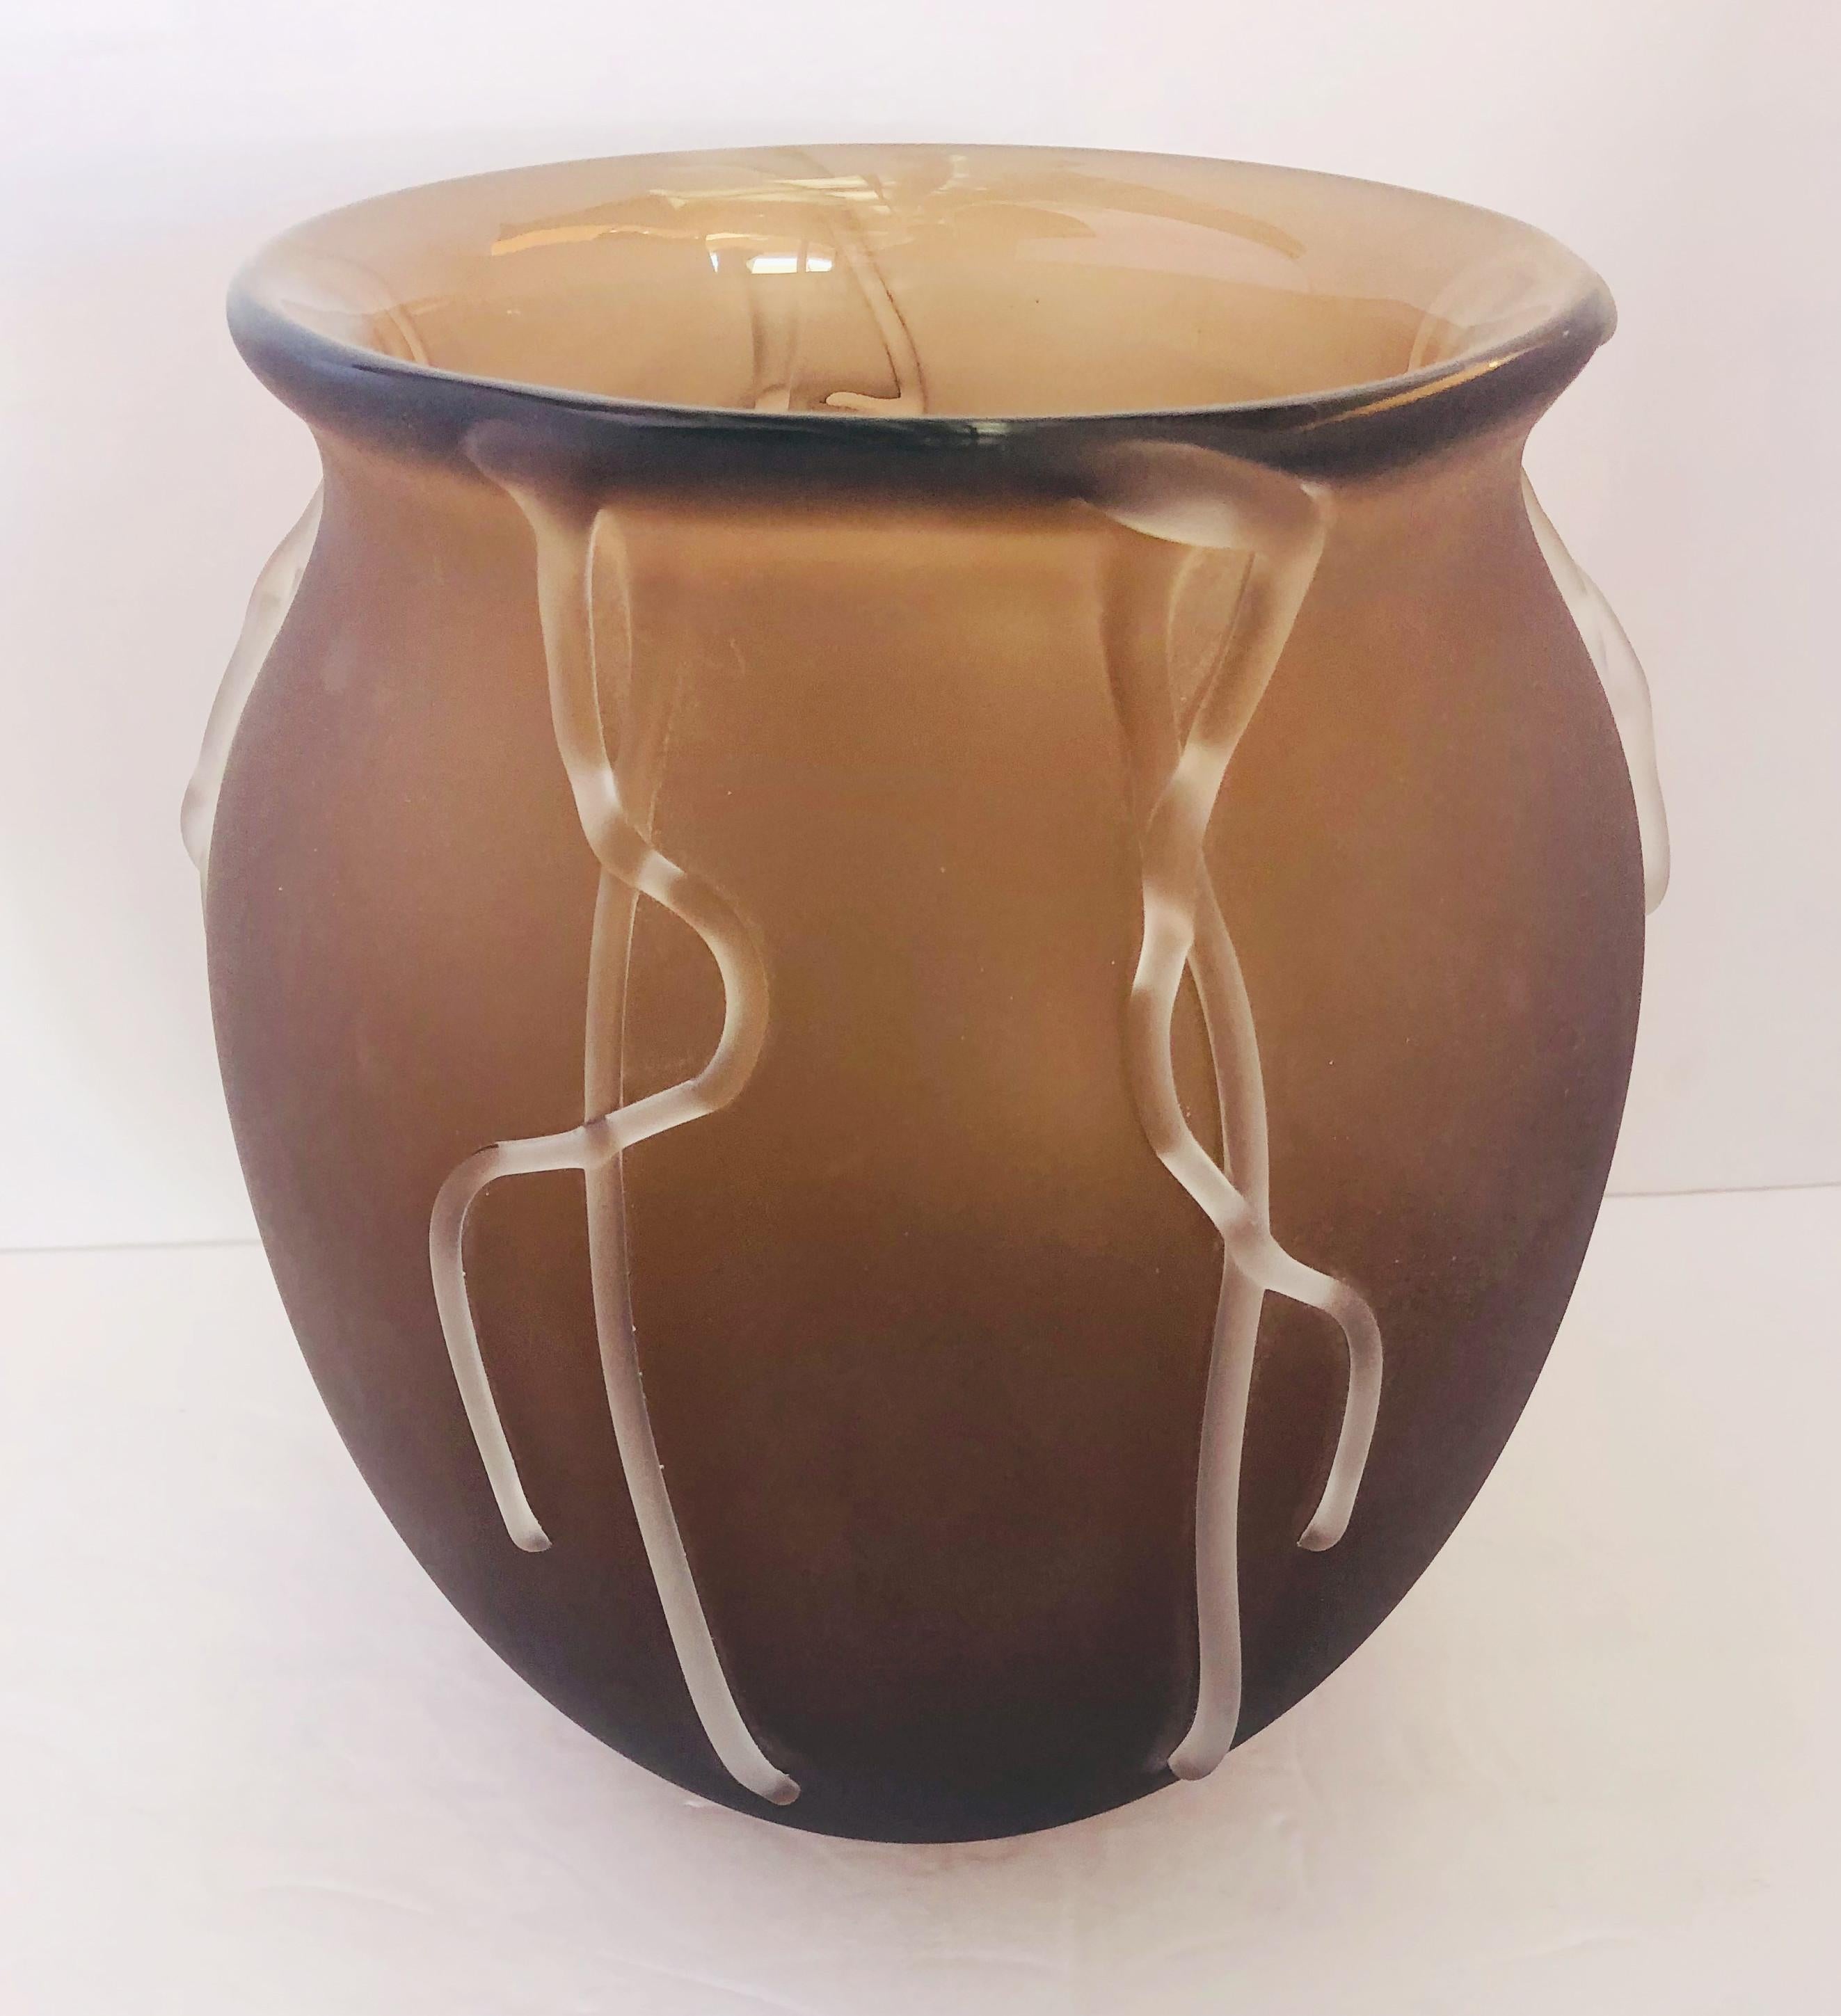 Vintage Italian smoky brown Murano glass vase decorated with clear dripped glass 
Made in Italy circa 1960s
 Height: 11 inches / Diameter: 11 inches 
1 in stock in Palm Springs currently ON 40% OFF SALE for $899 !!
Order Reference #: FABIOLTD